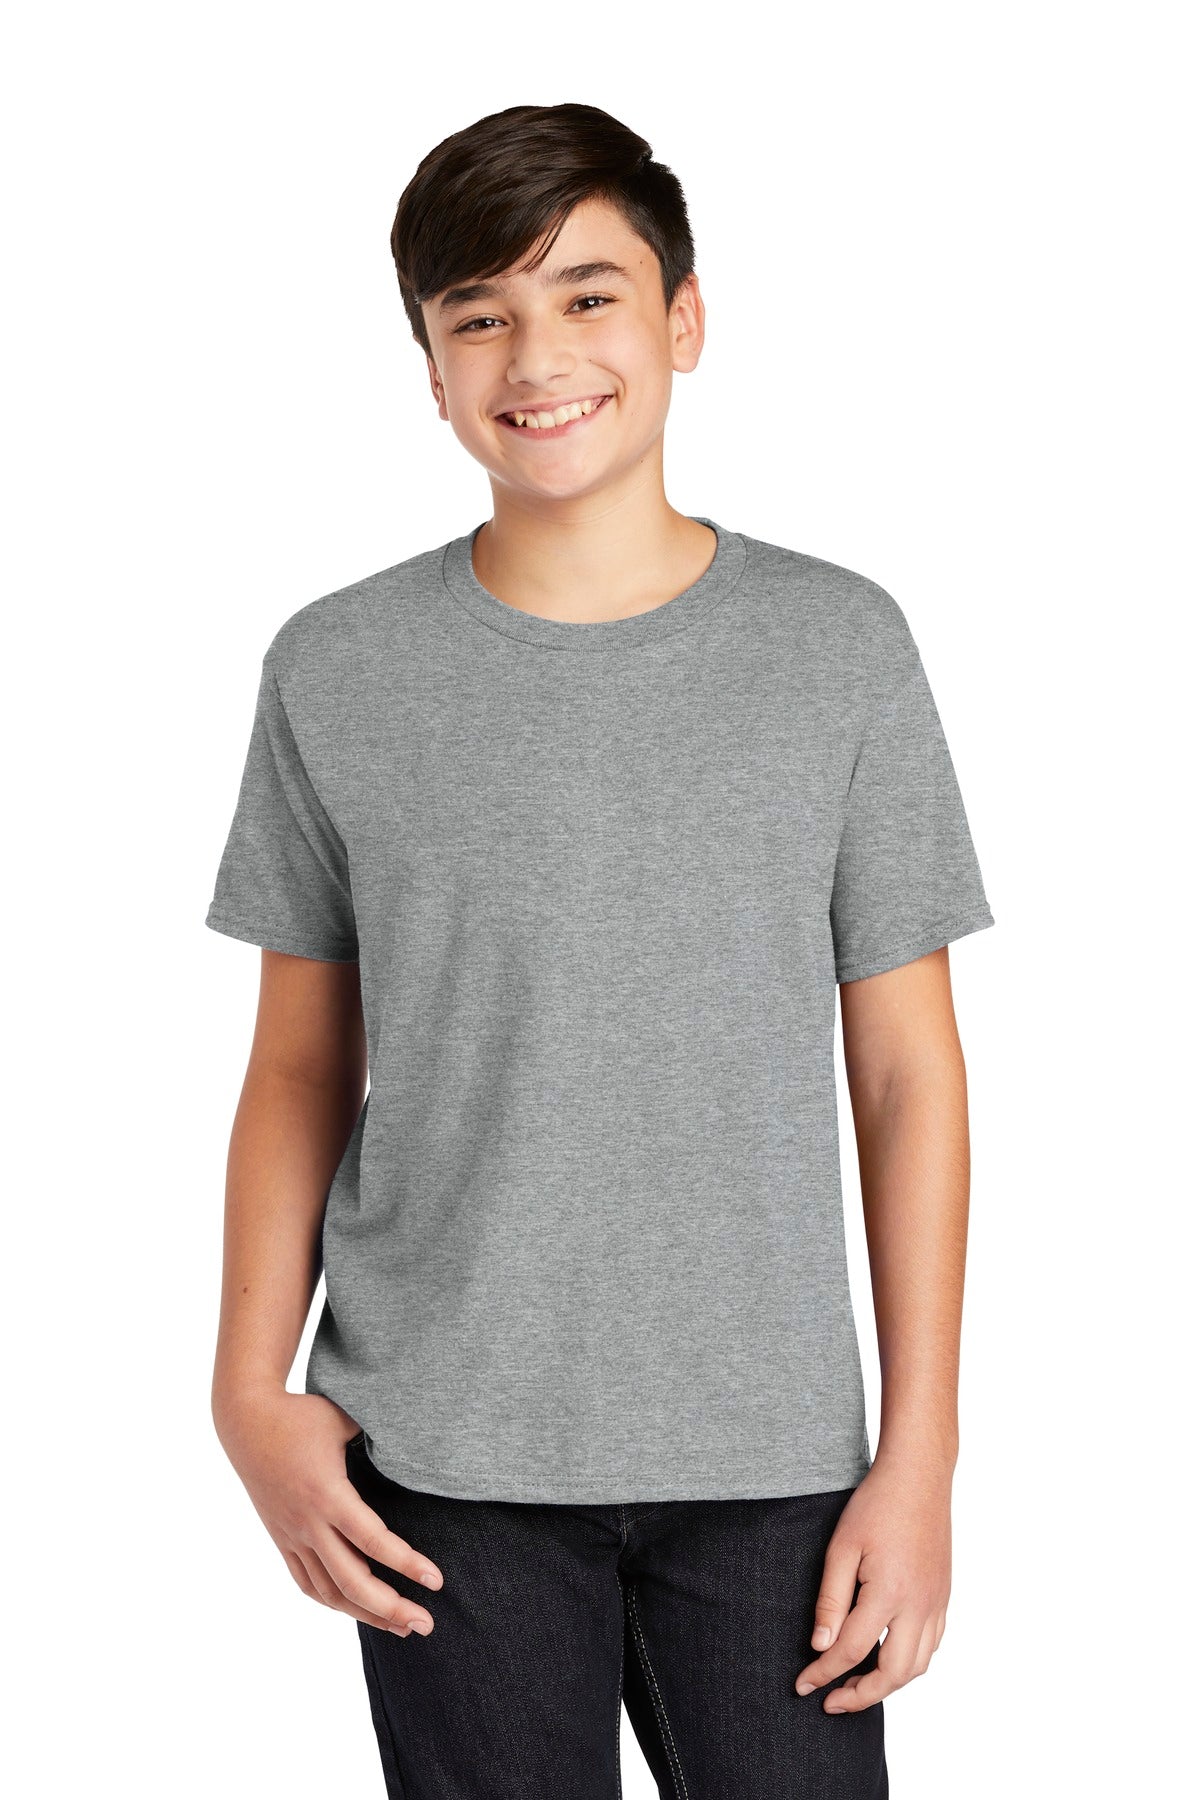 Anvil ® Youth 100% Combed Ring Spun Cotton T-Shirt 990B - DFW Impression